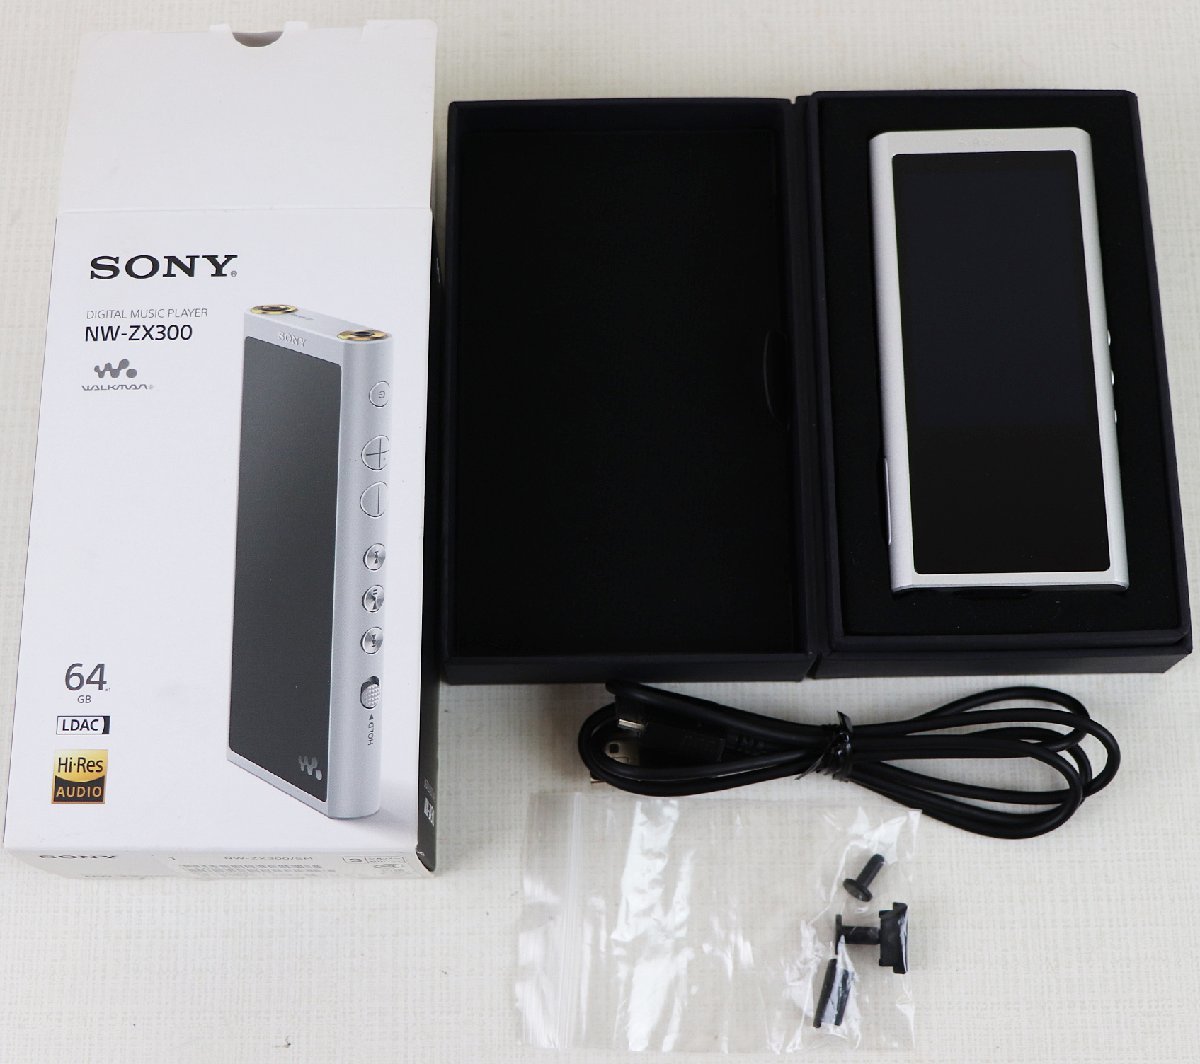 SONY ウォークマン NW-ZX300 ハイレゾ対応 - 通販 - gnlexpress.ch